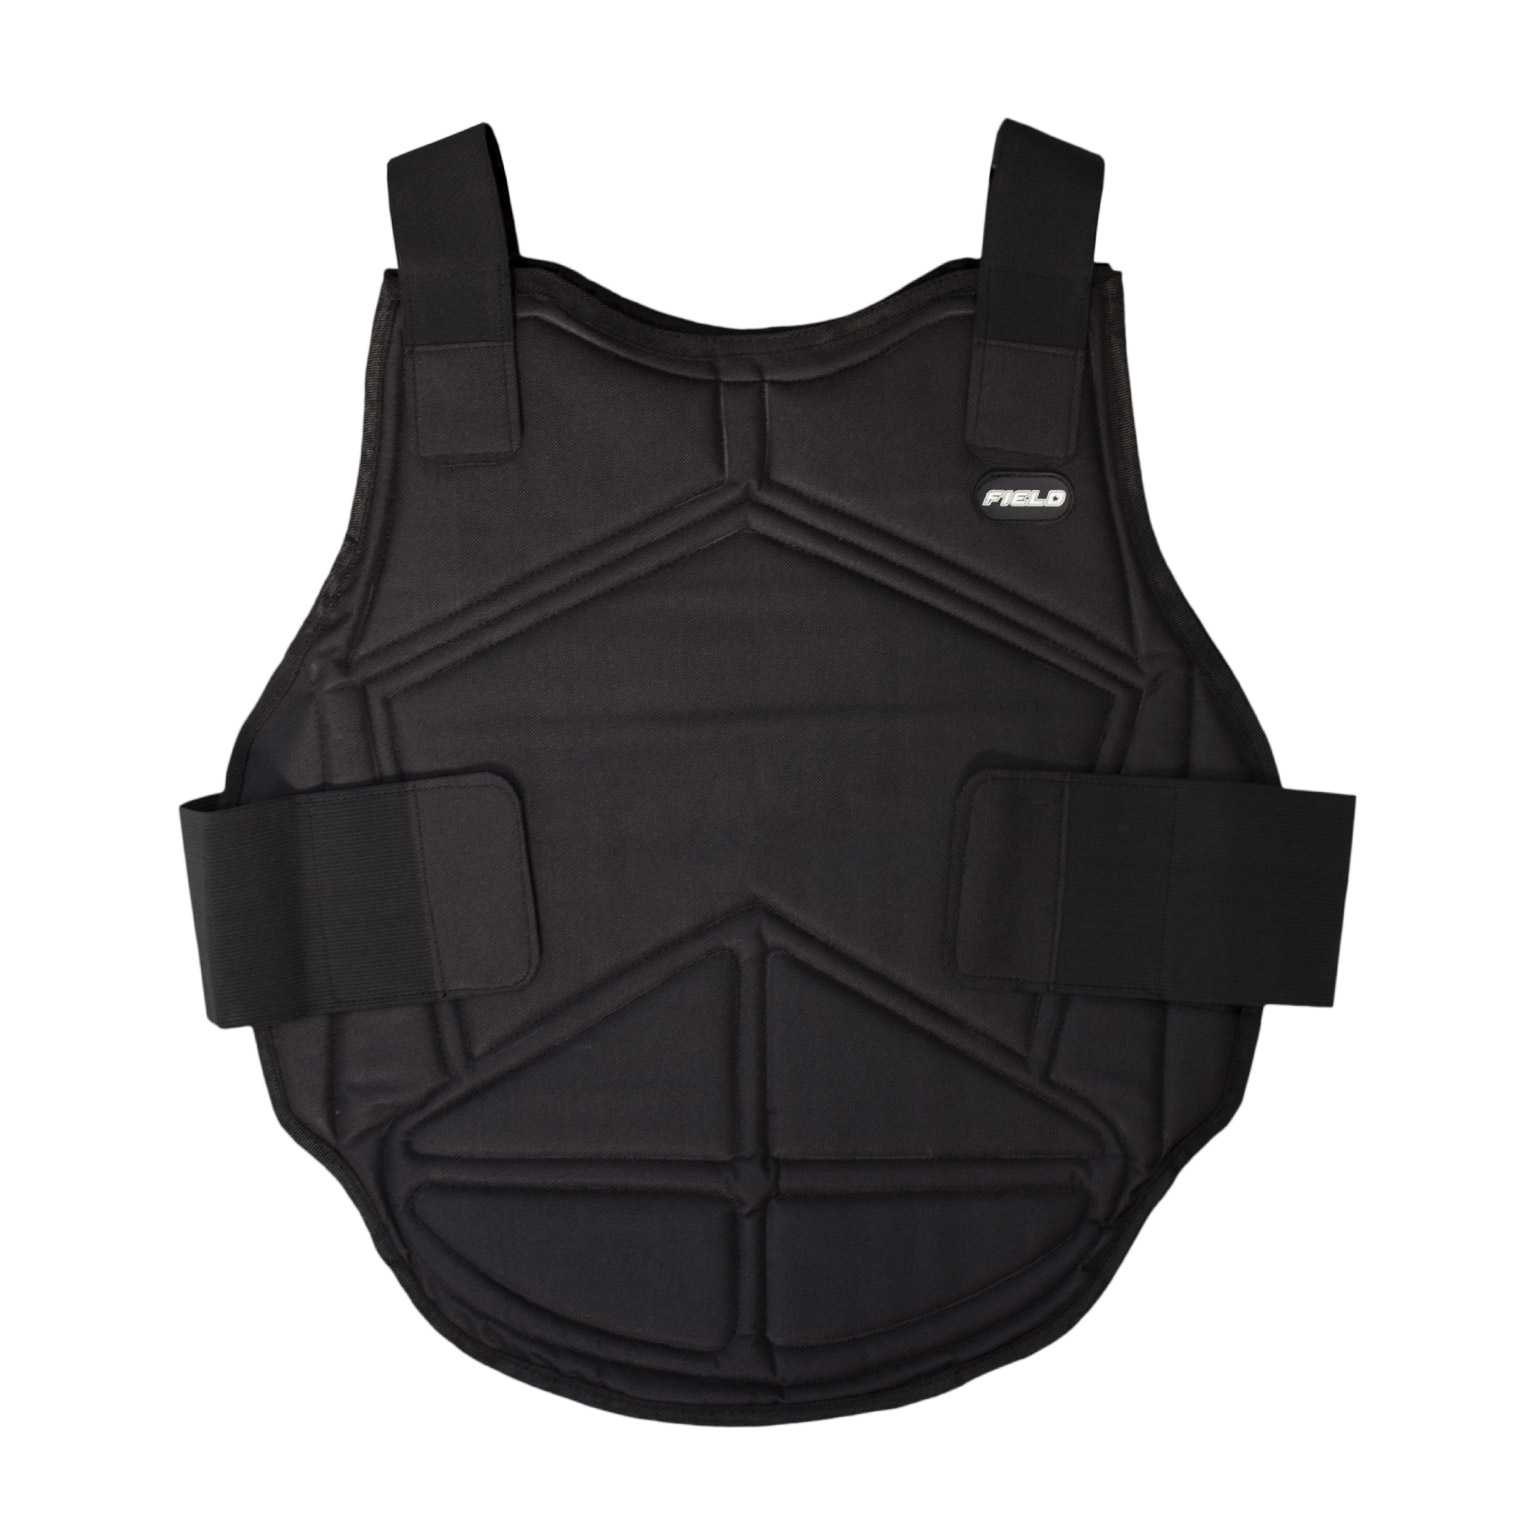 FIELD Chest Protector Black, Adult